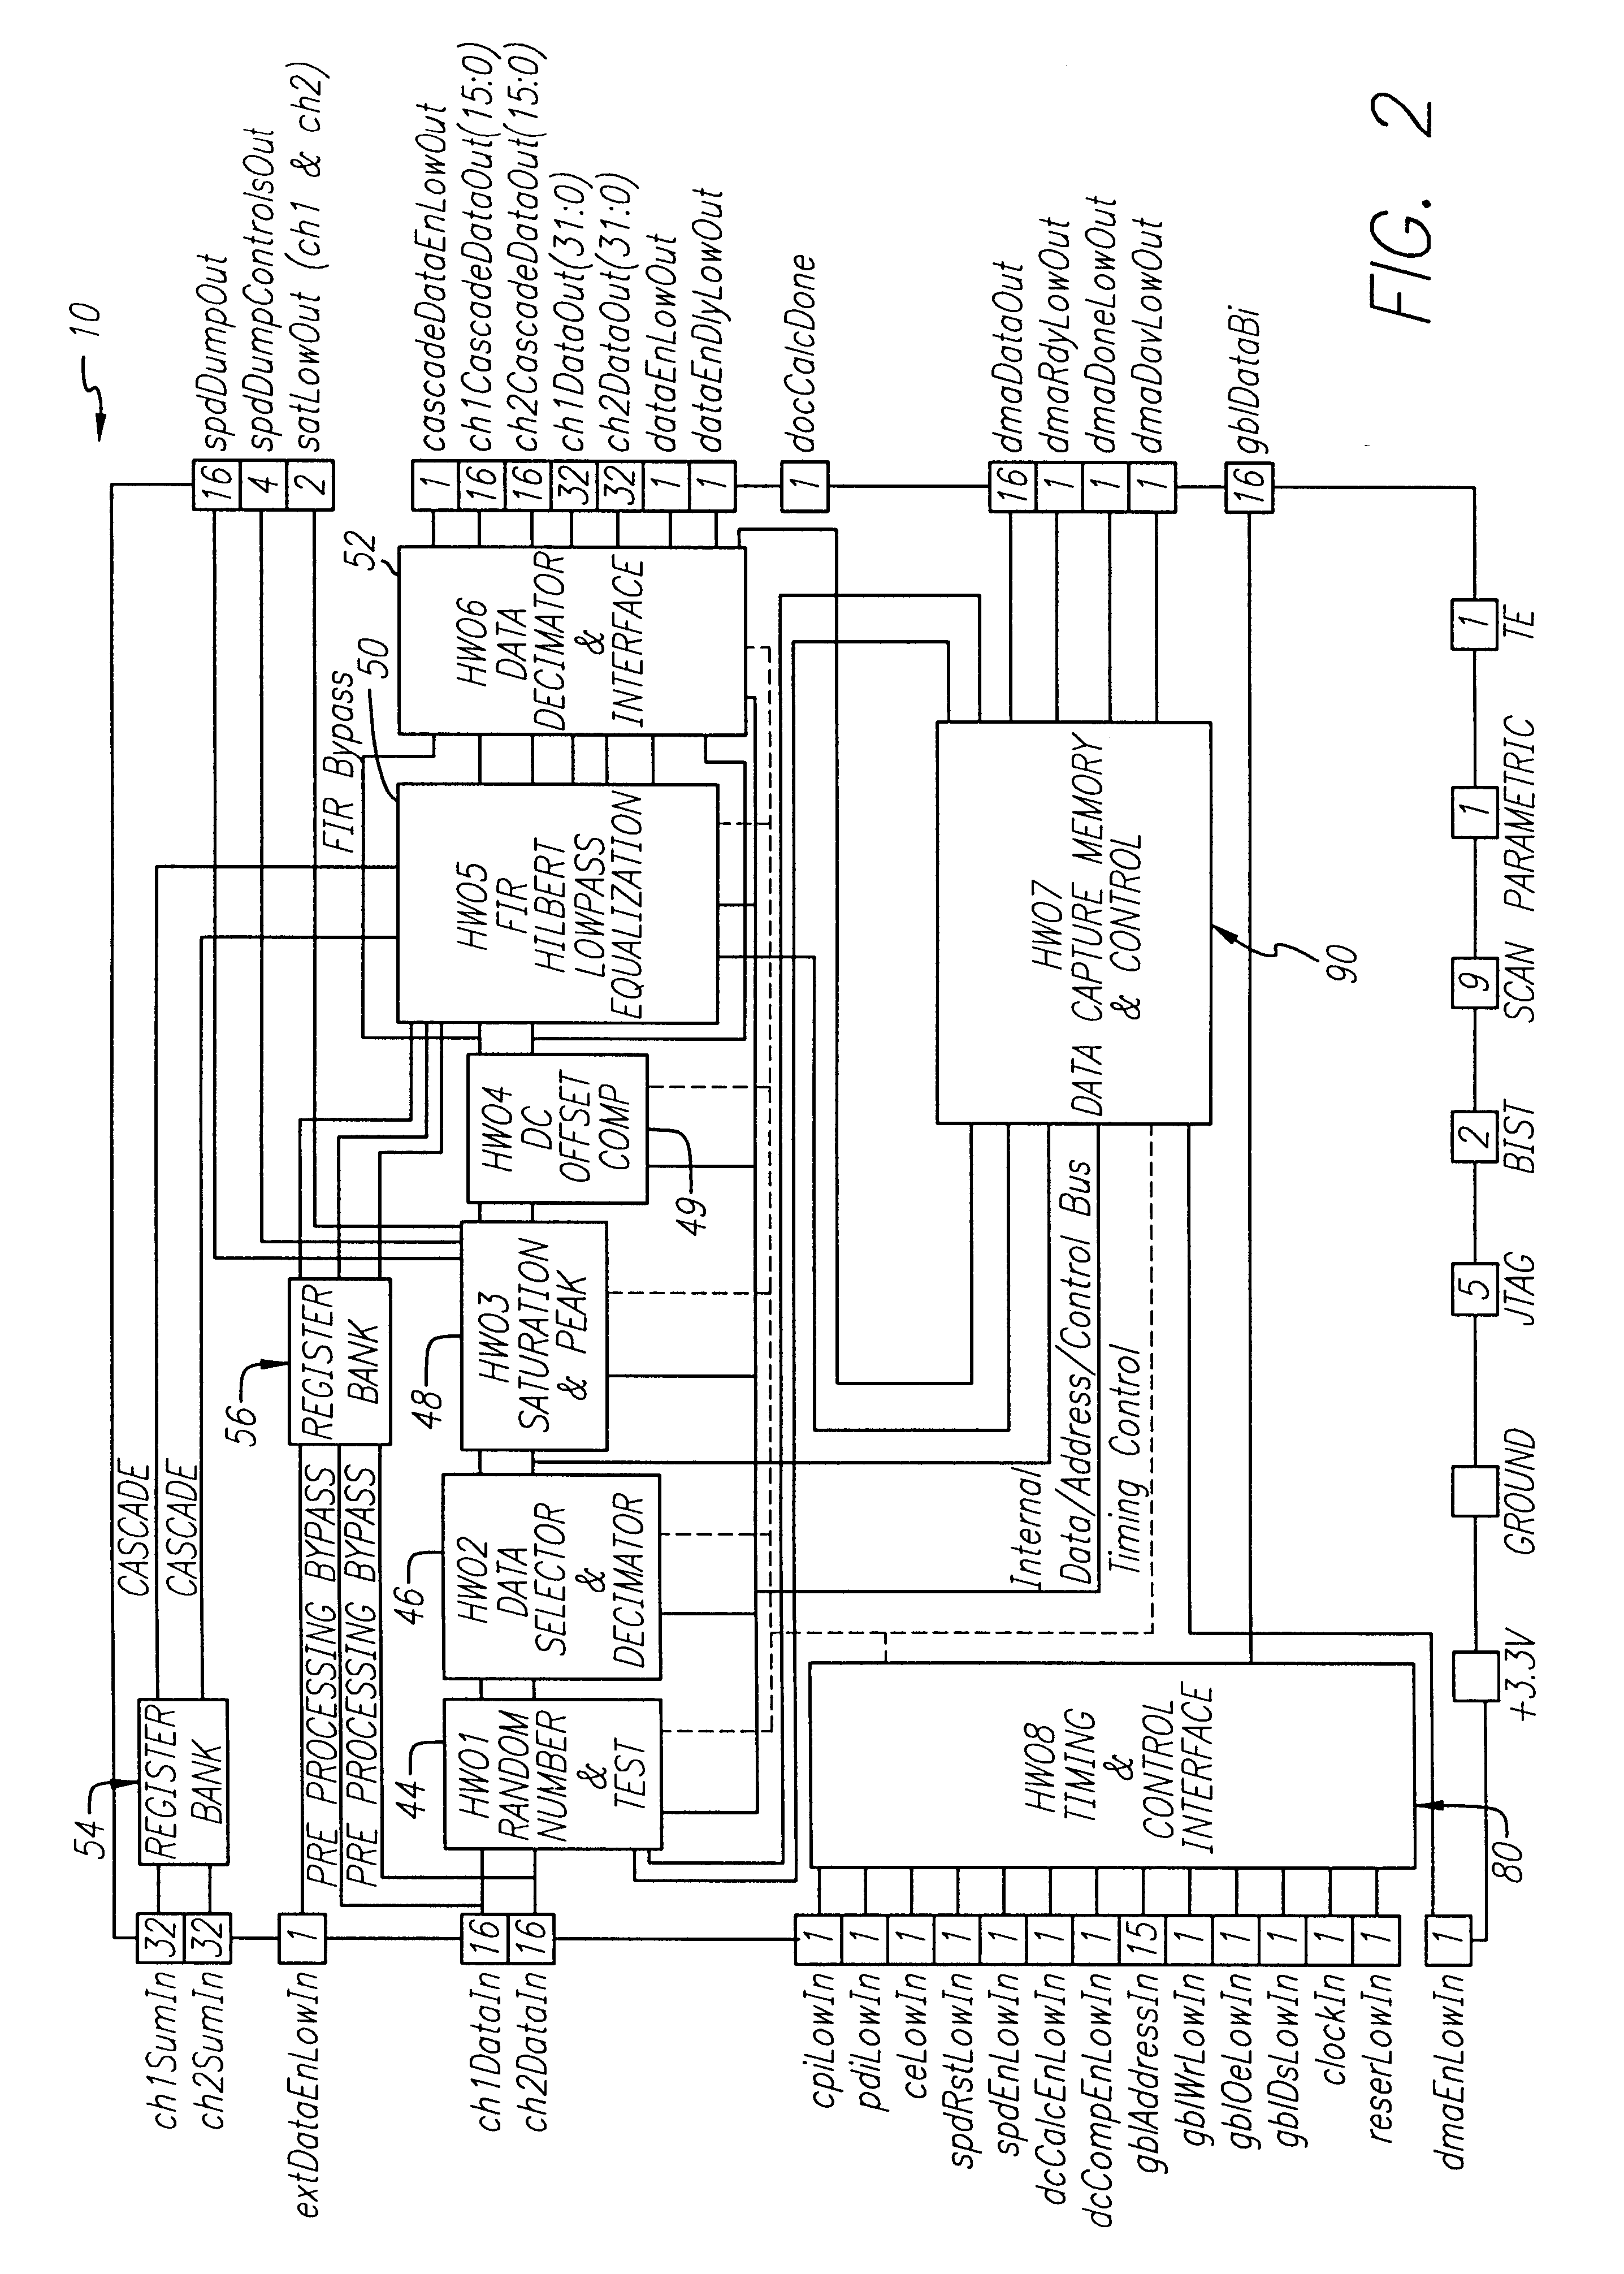 Beamforming and interference cancellation system using general purpose filter architecture